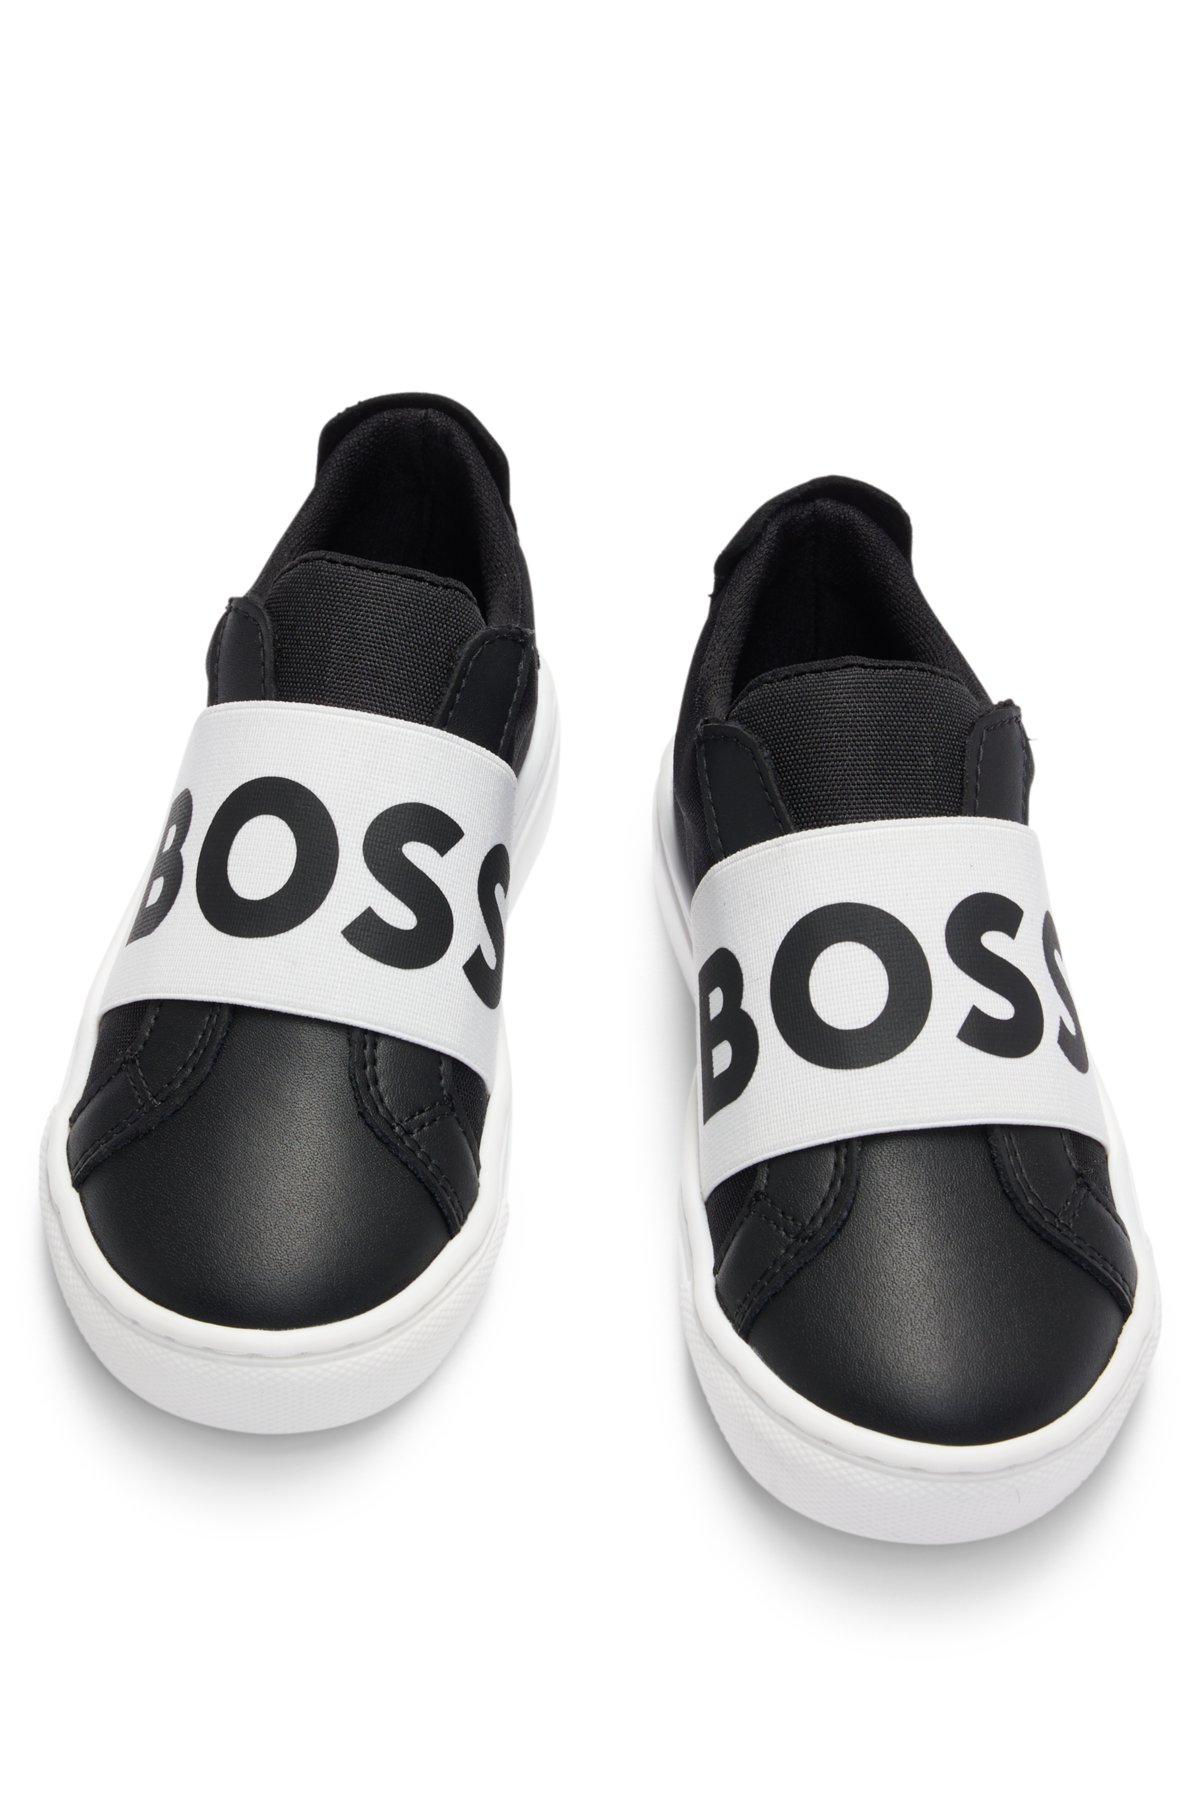 Kids' logo-strap trainers in leather and canvas, Black